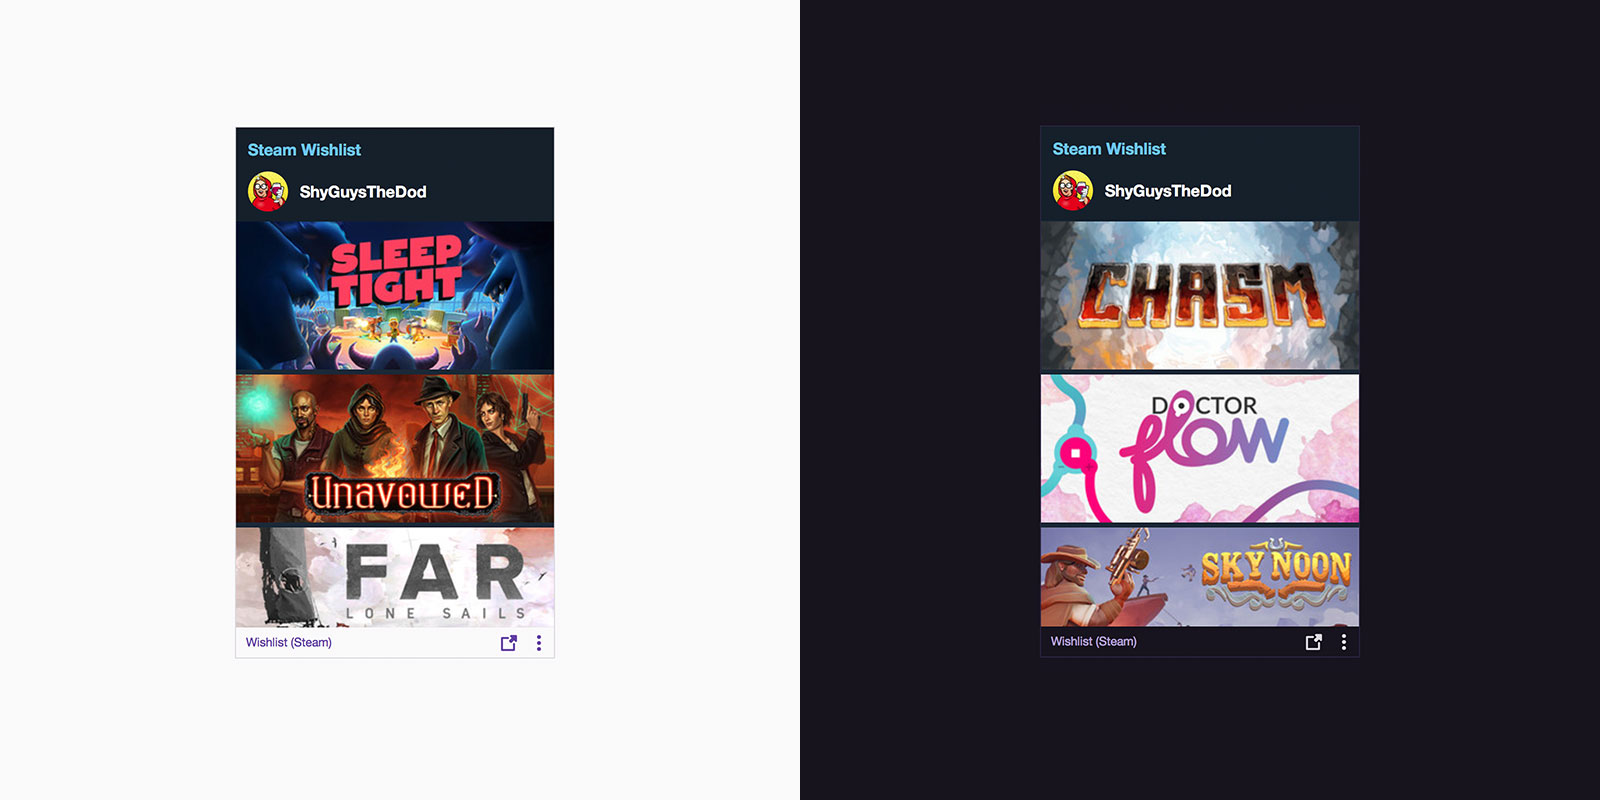 Steam Wishlist panel extension for Twitch by The_Plainswalker